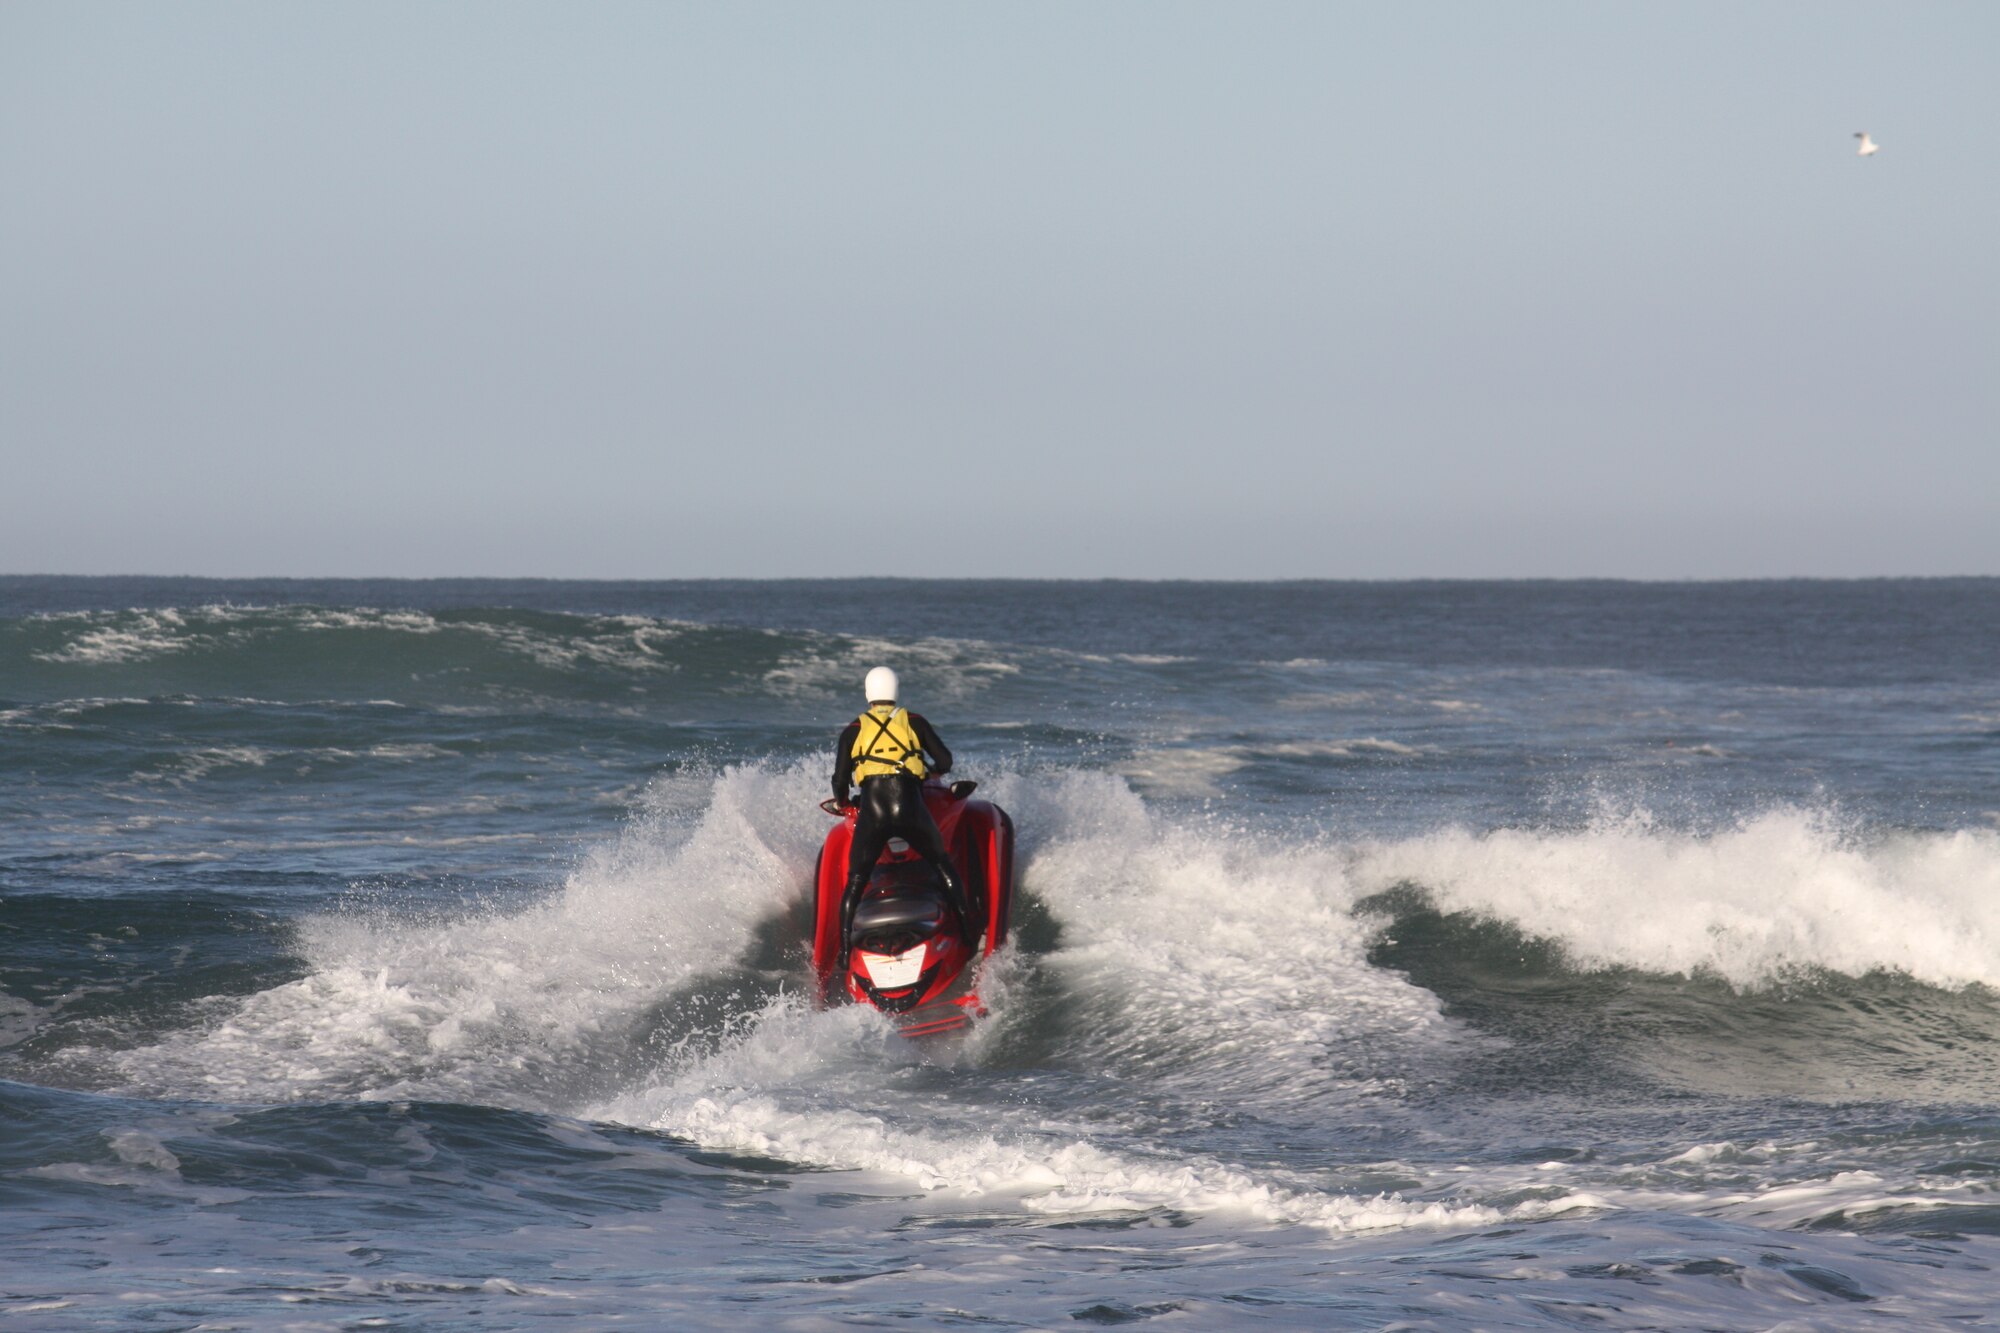 VANDENBERG AIR FORCE BASE, Calif. --  Vandenberg firefighter Matt Stevens races through the waves during a water rescue at Wall Beach here Feb. 19. The Vandenberg Fire Department's water rescue team rescued an Airman who was pulled out to sea while surfing. (Courtesy photo)